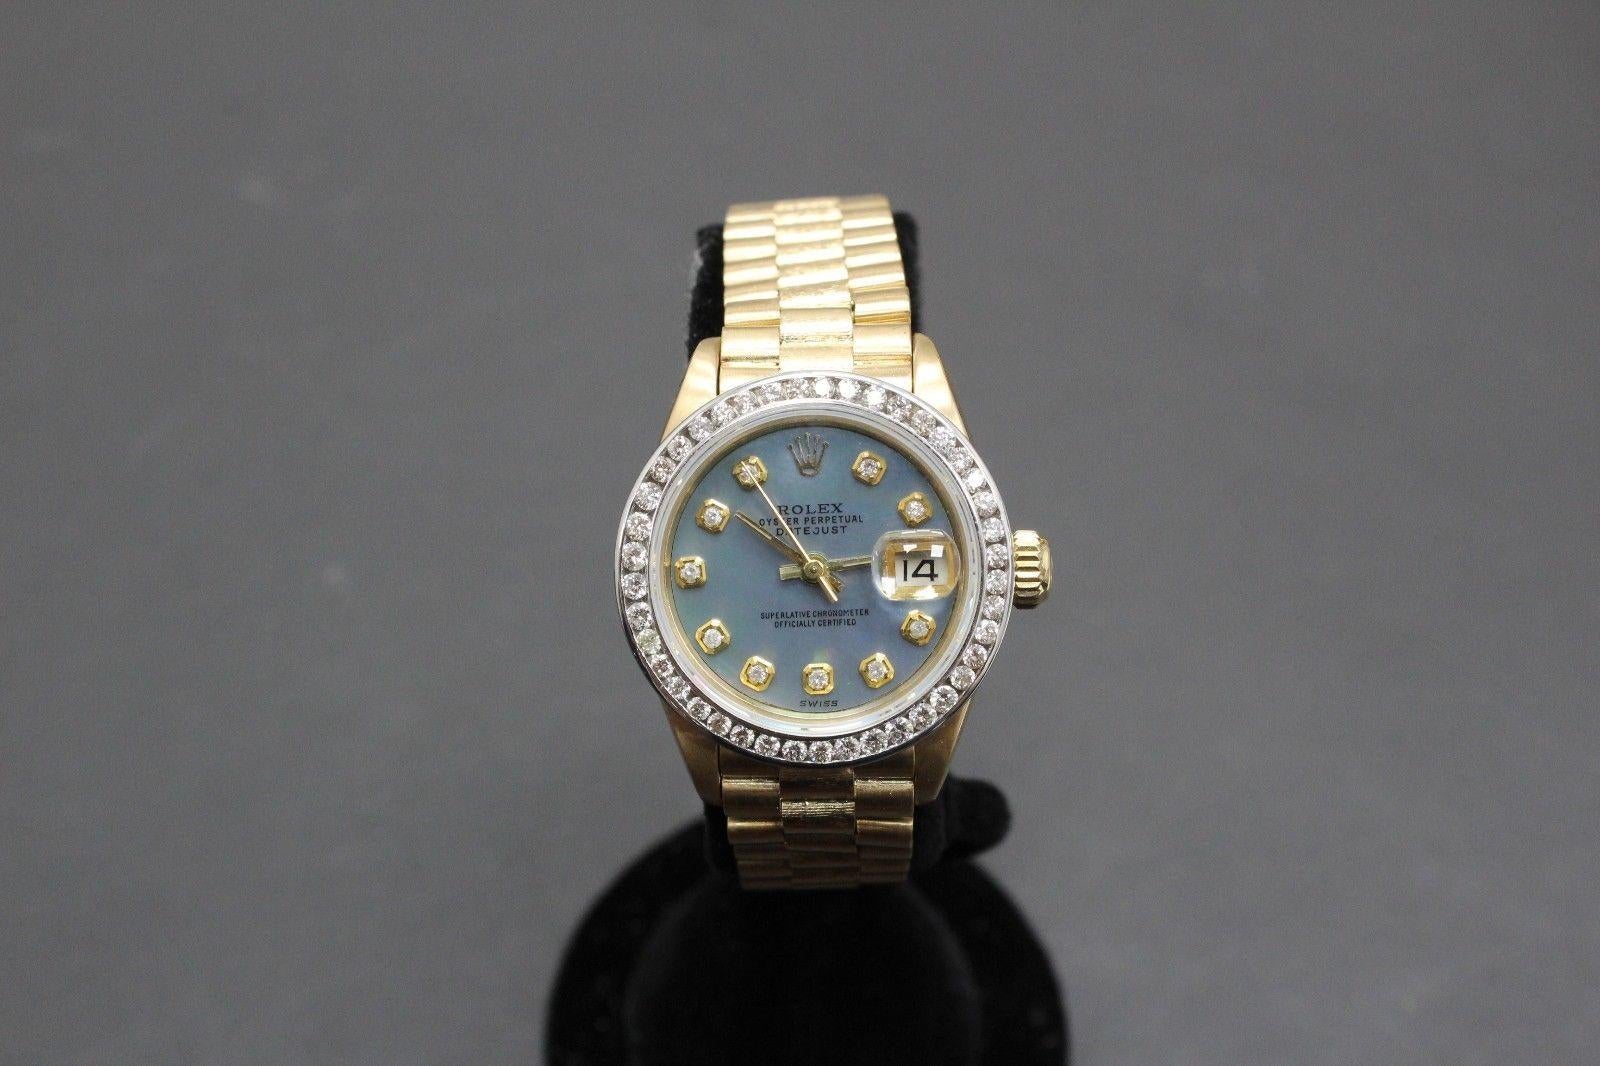 Style Number: 6917

Serial: 6286***

Model: President Datejust 

Case Material: 18K Yellow Gold

Band: 18K Yellow Gold

Bezel: Custom Diamond Bezel 

Dial: Custom Blue MOP Diamond Dial 

Face: Sapphire Crystal 

Case Size: 26mm 

Includes: 

-Rolex